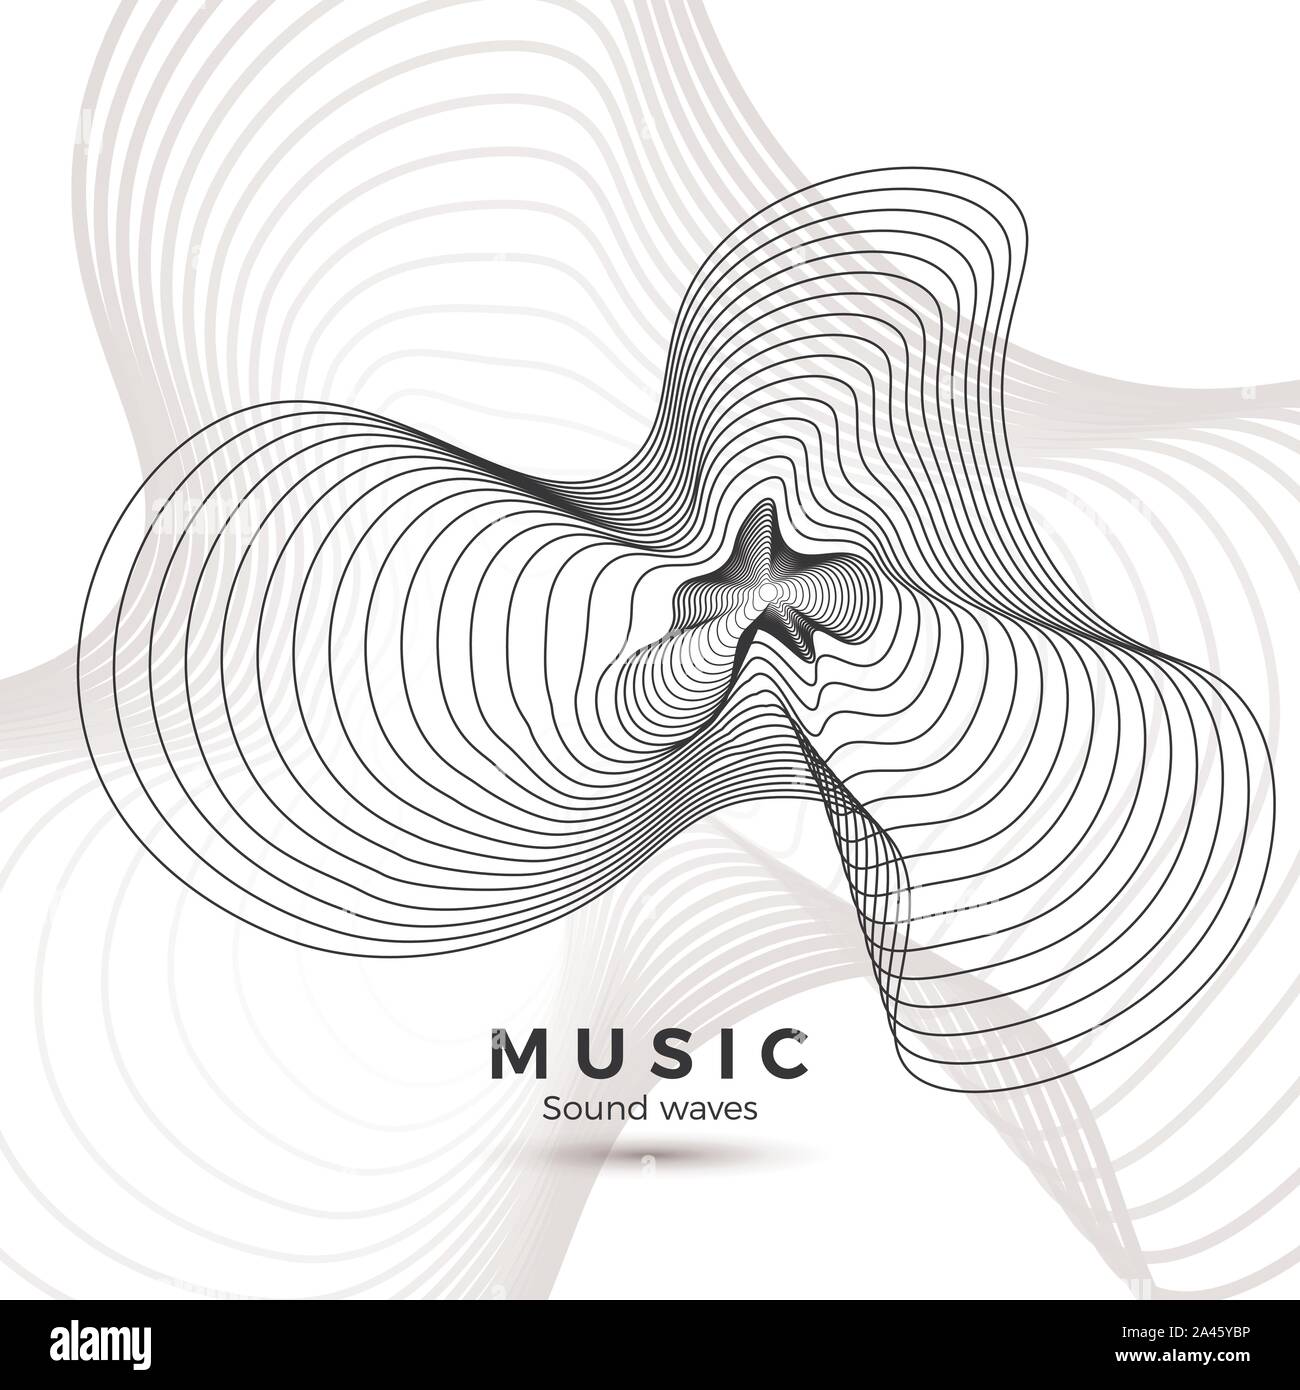 Sound wave template. Black and white illustration for your music album design. Abstract radial digital signal form. Vector Stock Vector